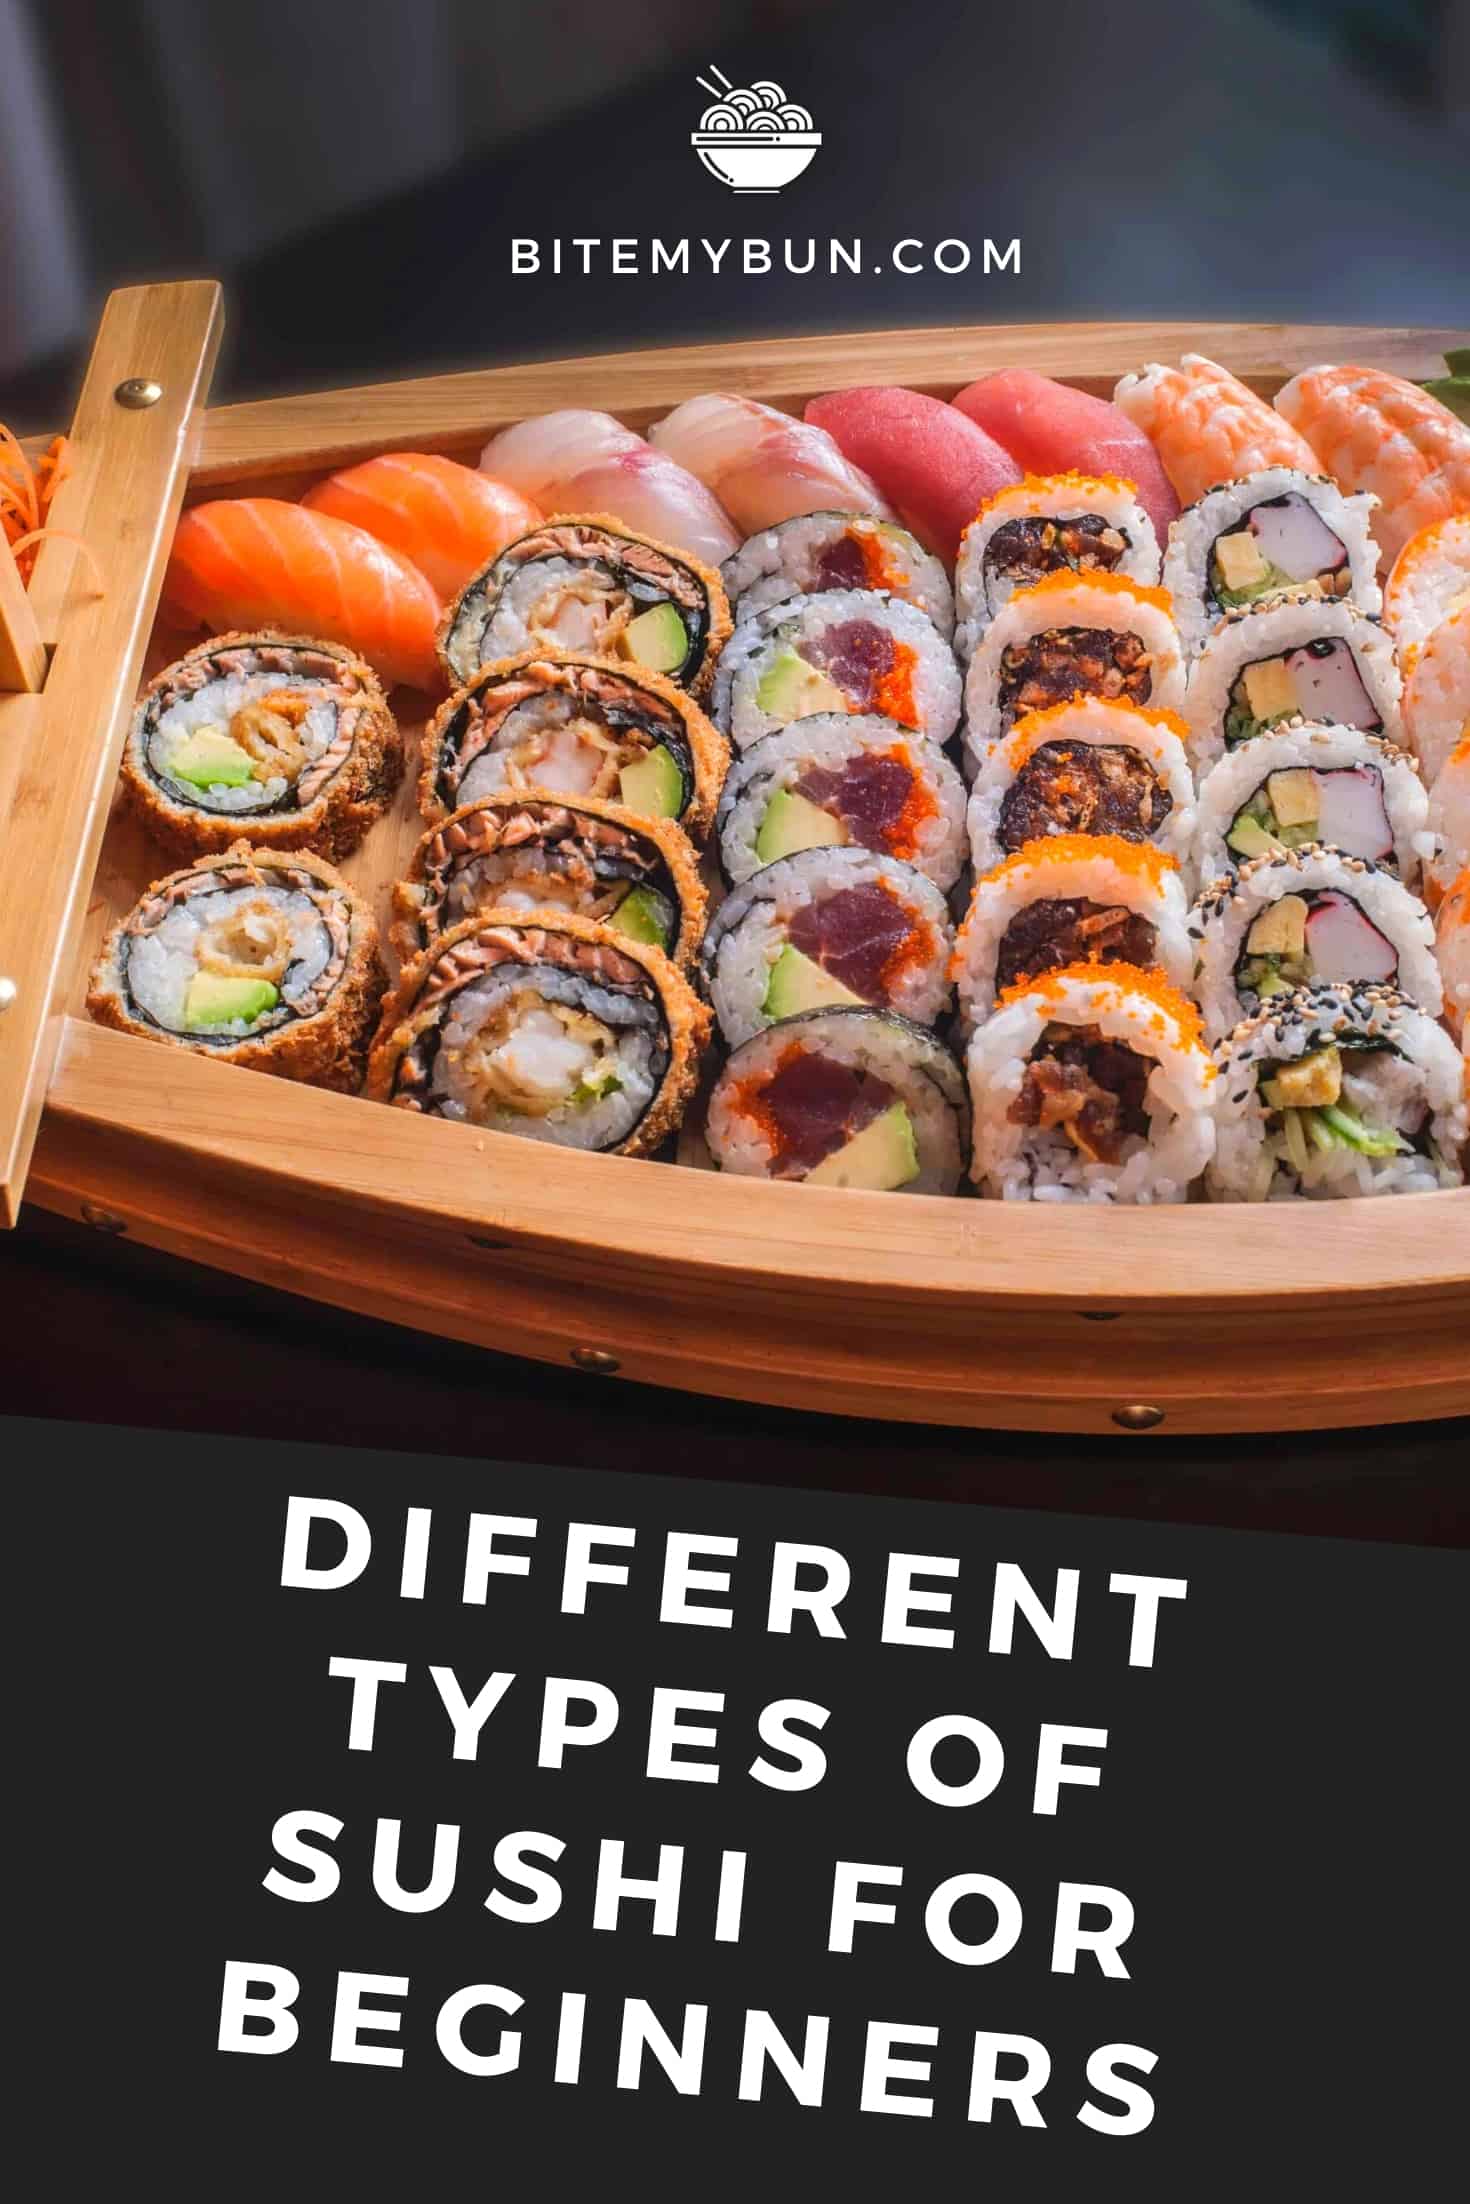 Different types of sushi for beginners